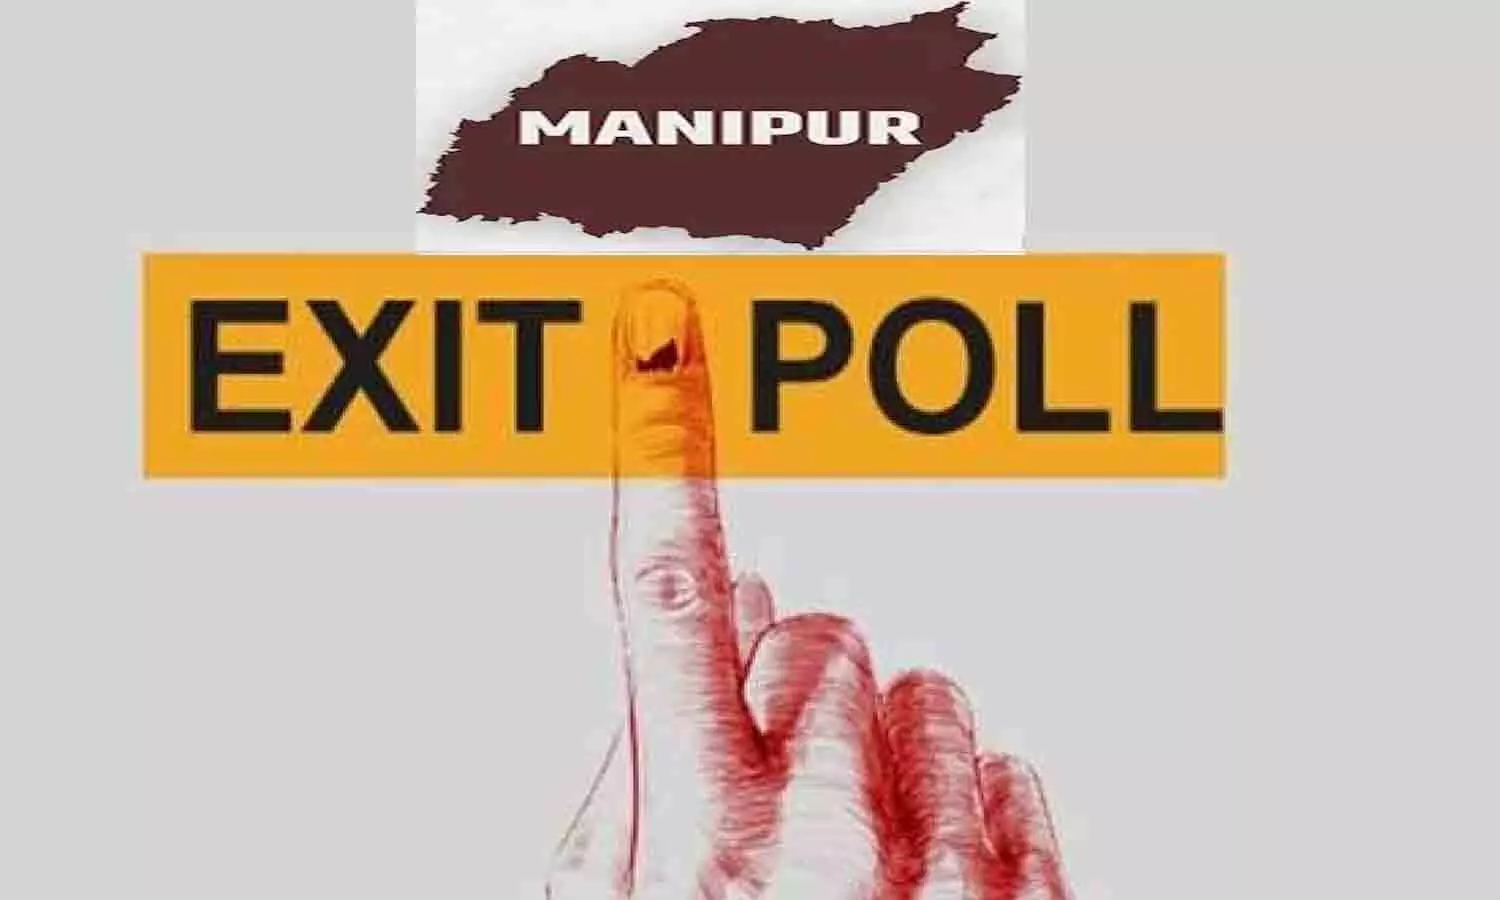 Exit Poll Results In Manipur: BJP government is making exit polls in Manipur, may get 23 to 28 seats